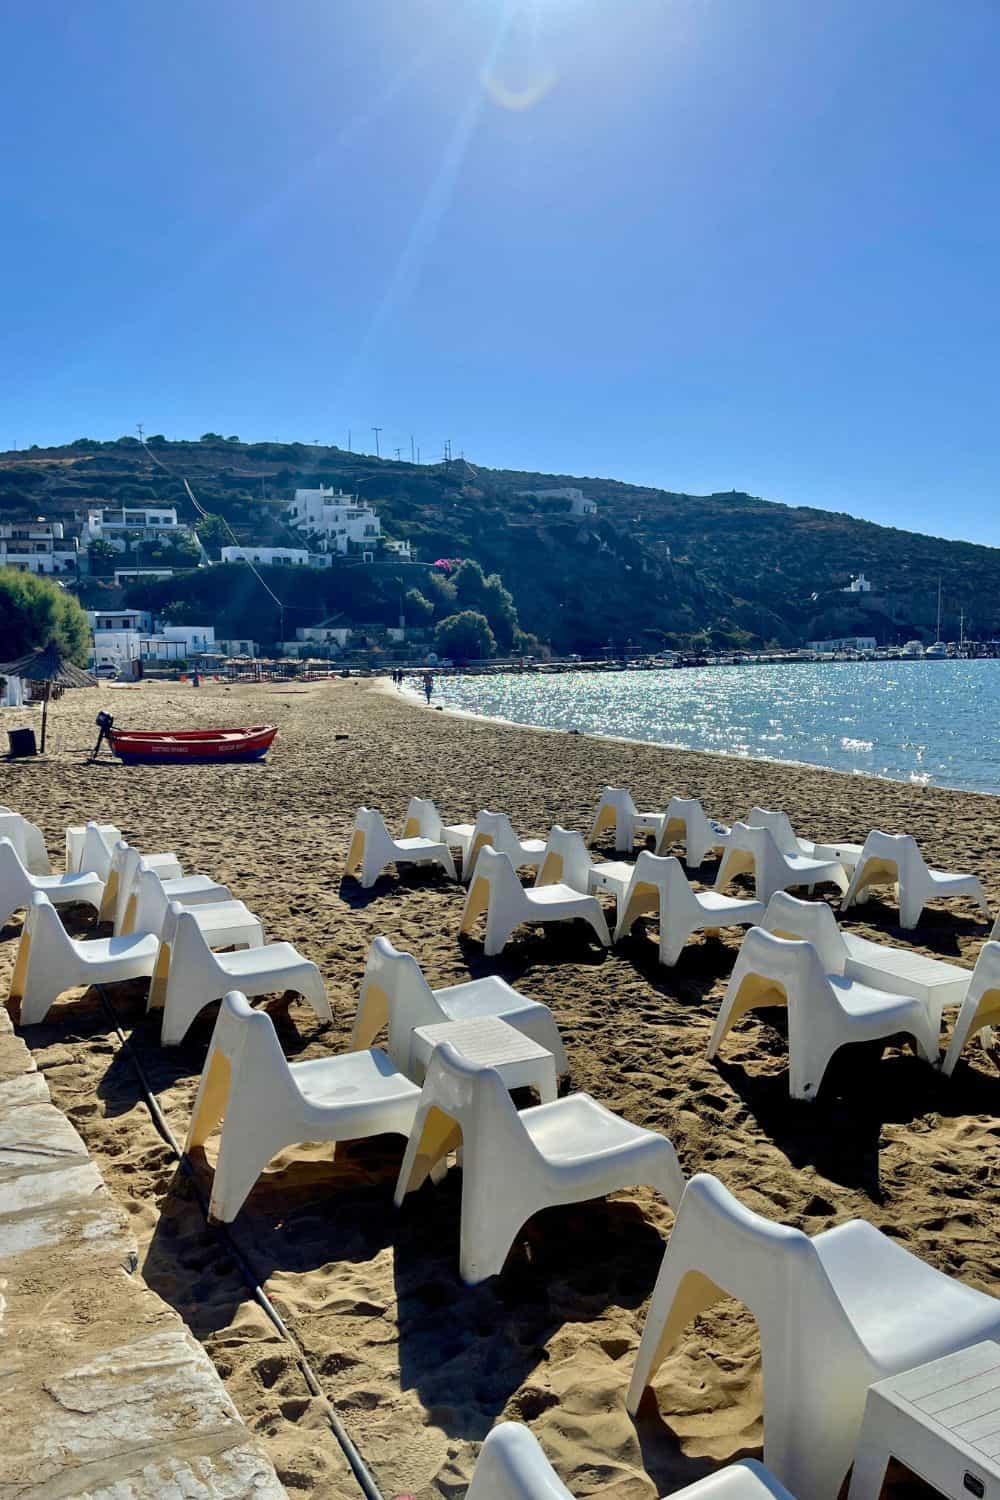 A serene morning scene on a Sifnos beach, with rows of white sun loungers waiting patiently for visitors. The calm blue sea complements the clear sky, while a traditional boat rests on the sand, highlighting the relaxed atmosphere of the island